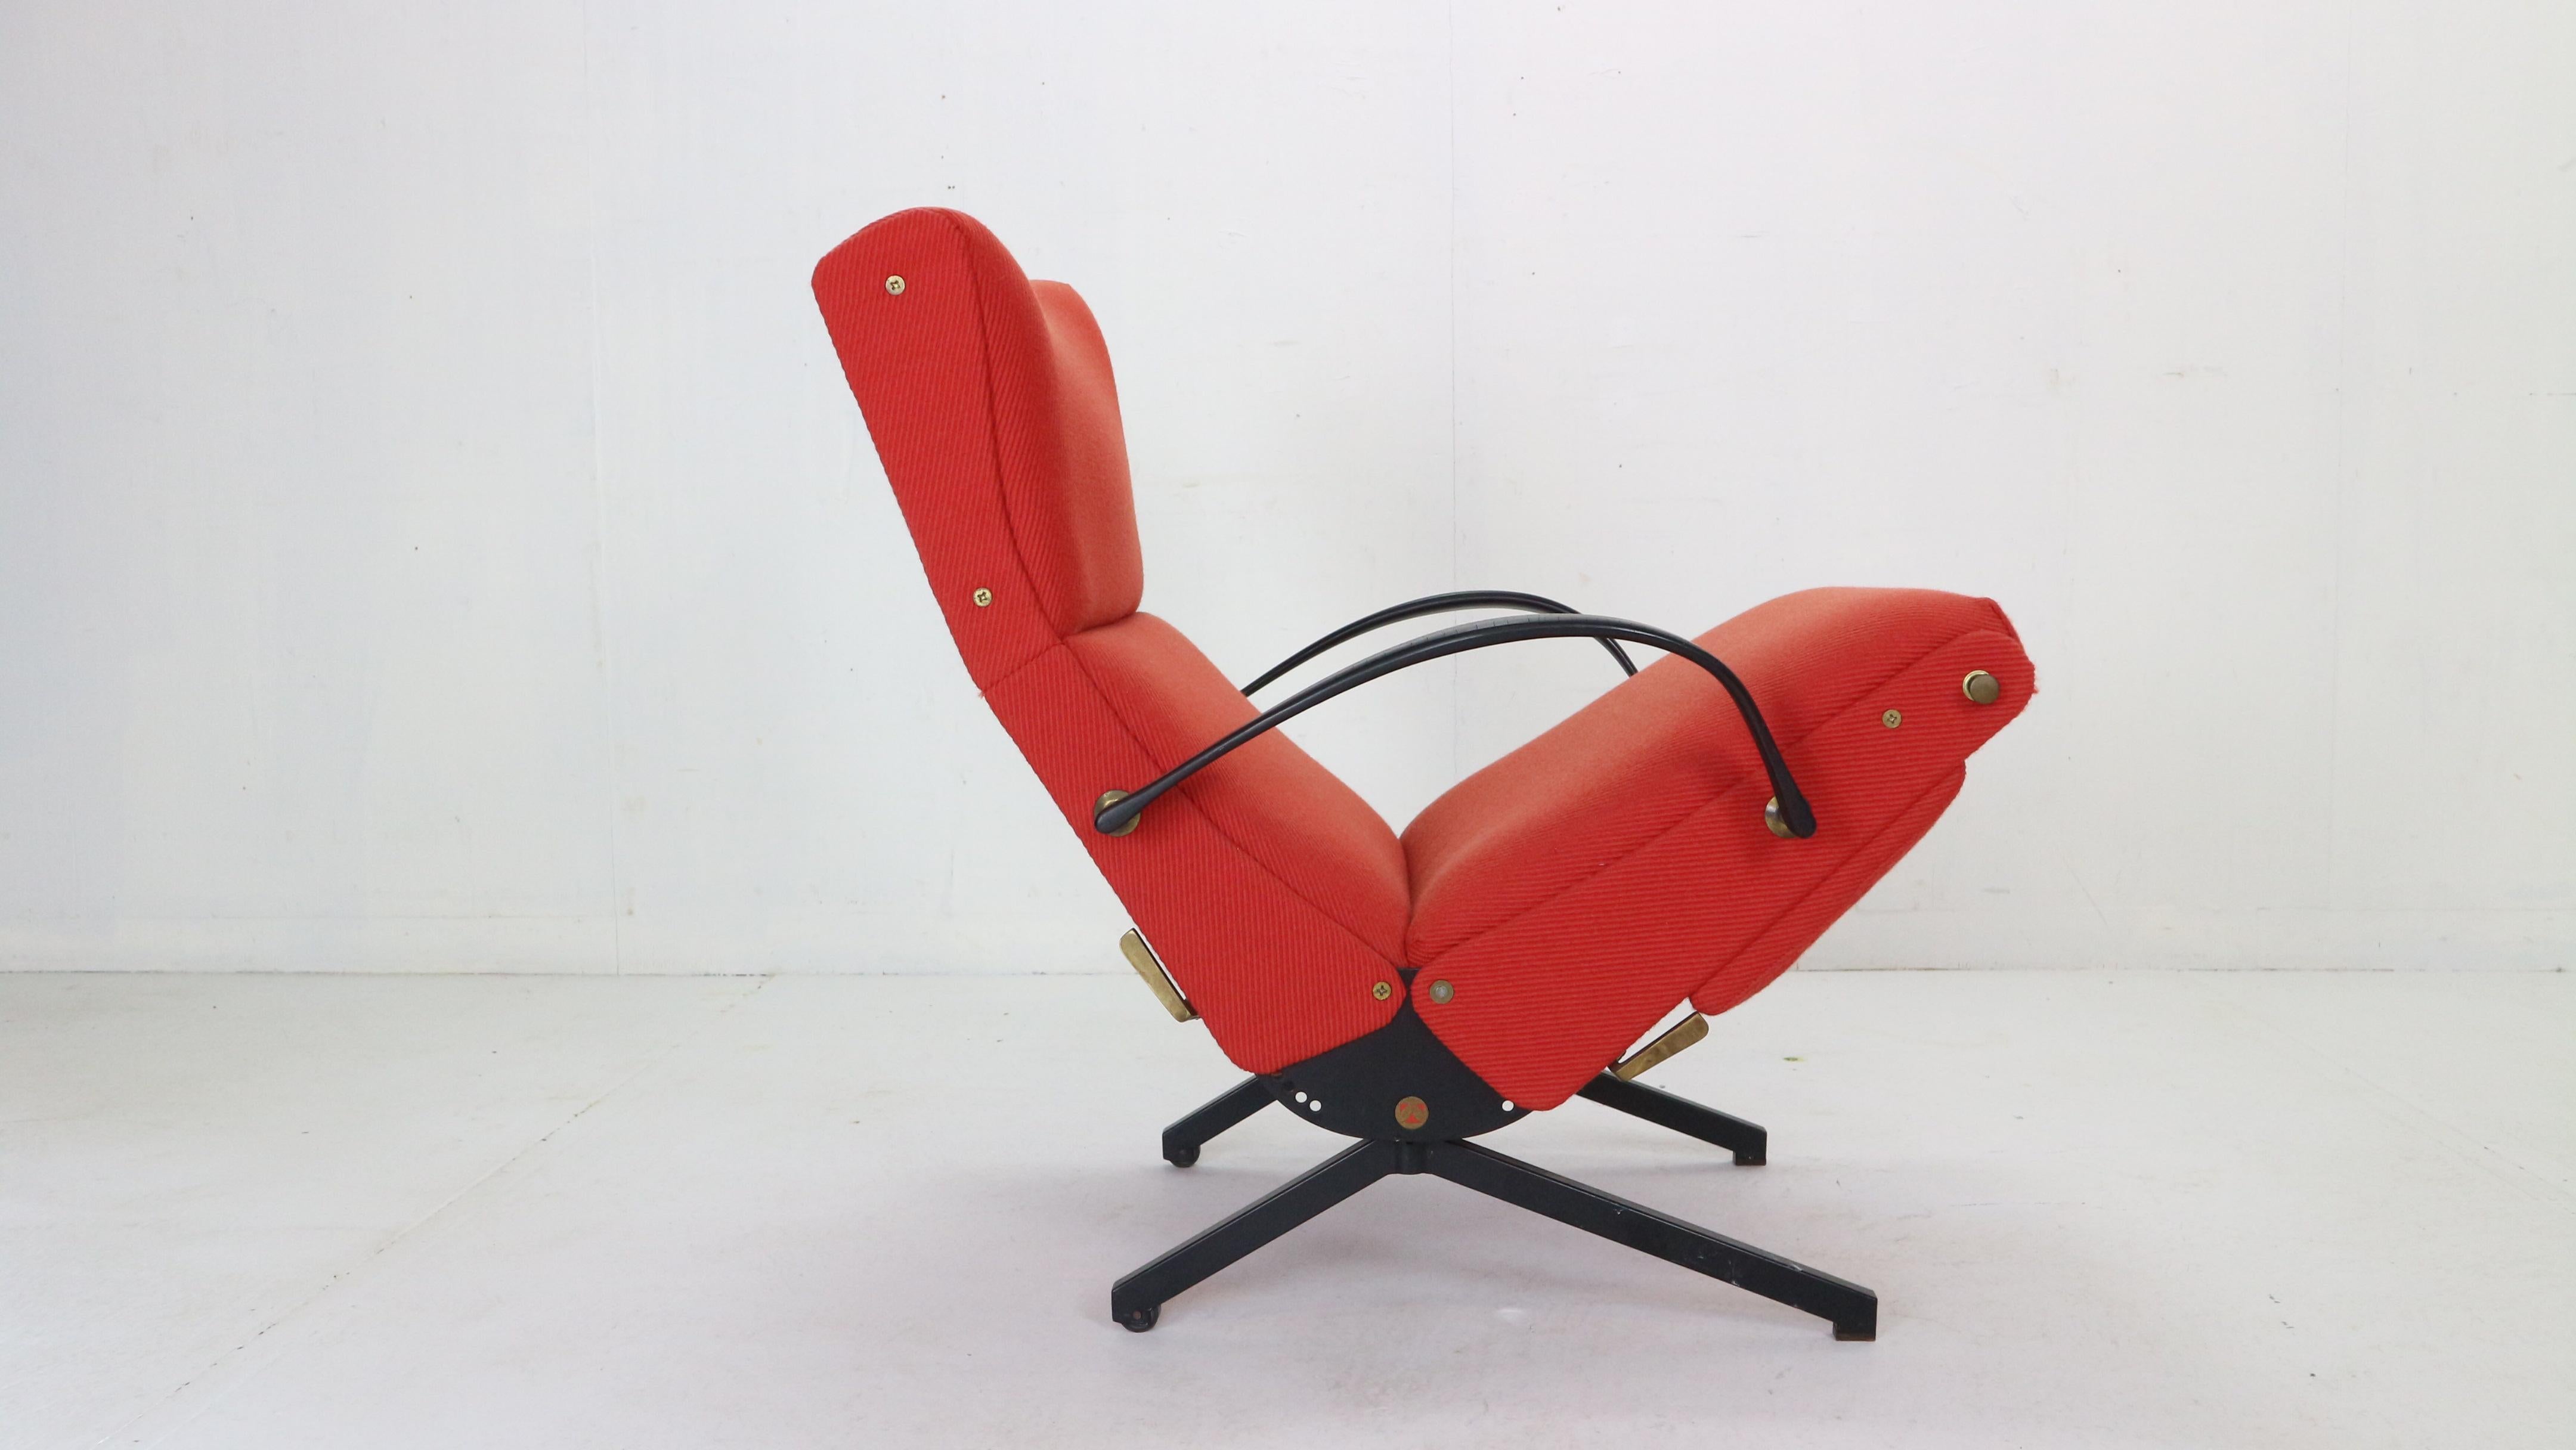 This lounge chair, ‘P40’, was designed by Osvaldo Borsani in 1955 for Tecno, Italy. This item is an early model and without a doubt an icon of 1950’s Italian design.

The back can be reclined in different angles, the flexible rubber arm rests can